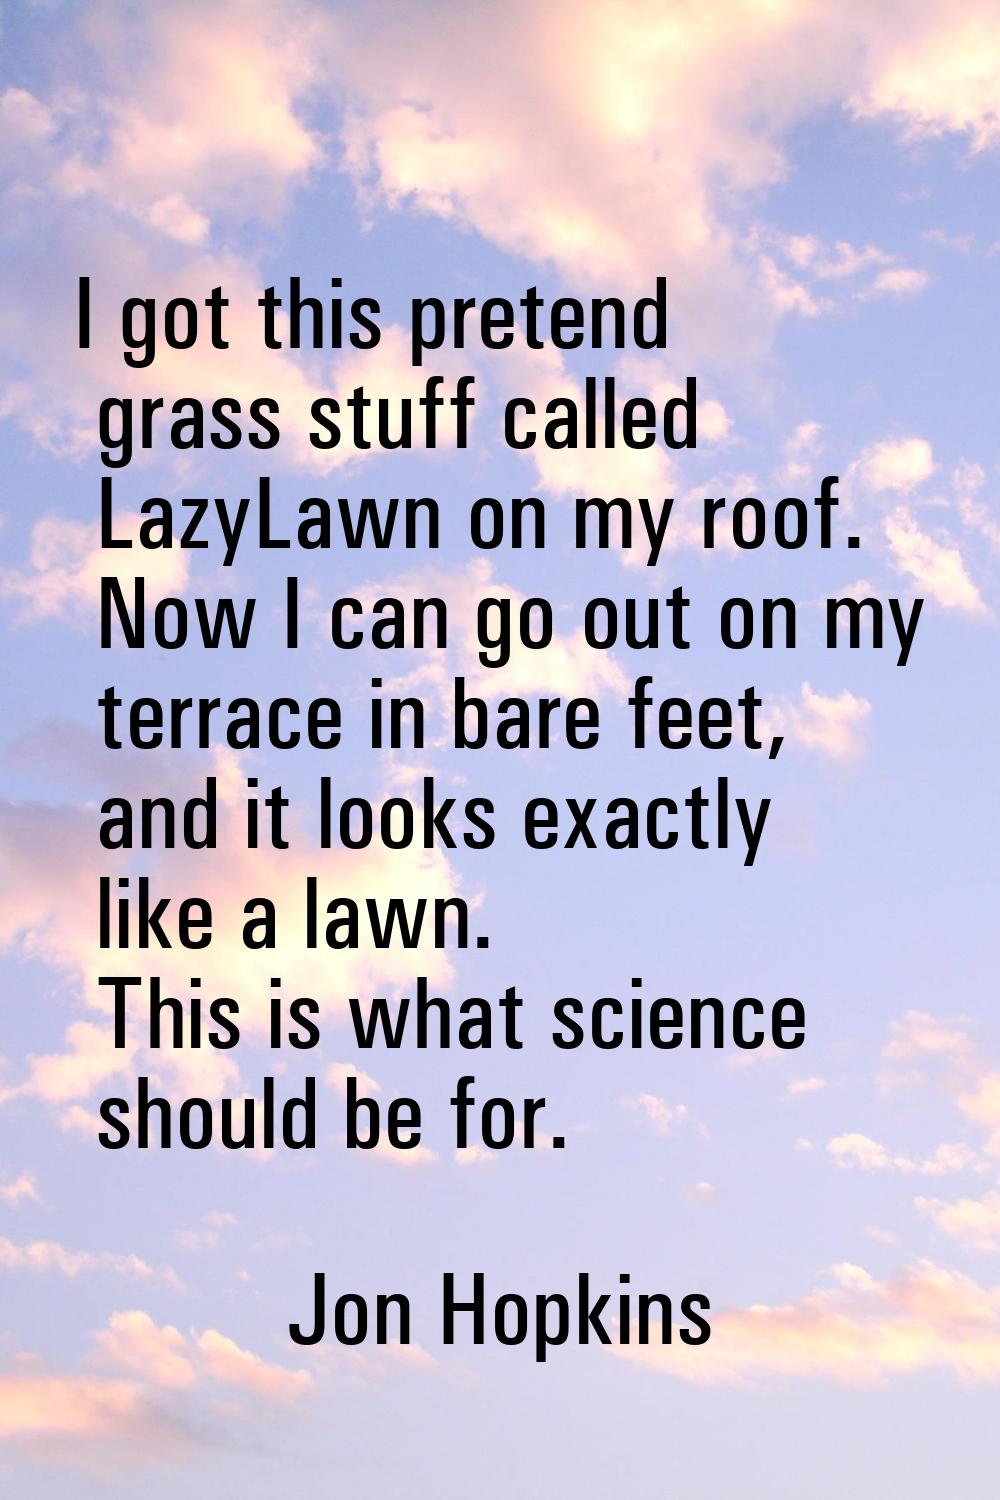 I got this pretend grass stuff called LazyLawn on my roof. Now I can go out on my terrace in bare f